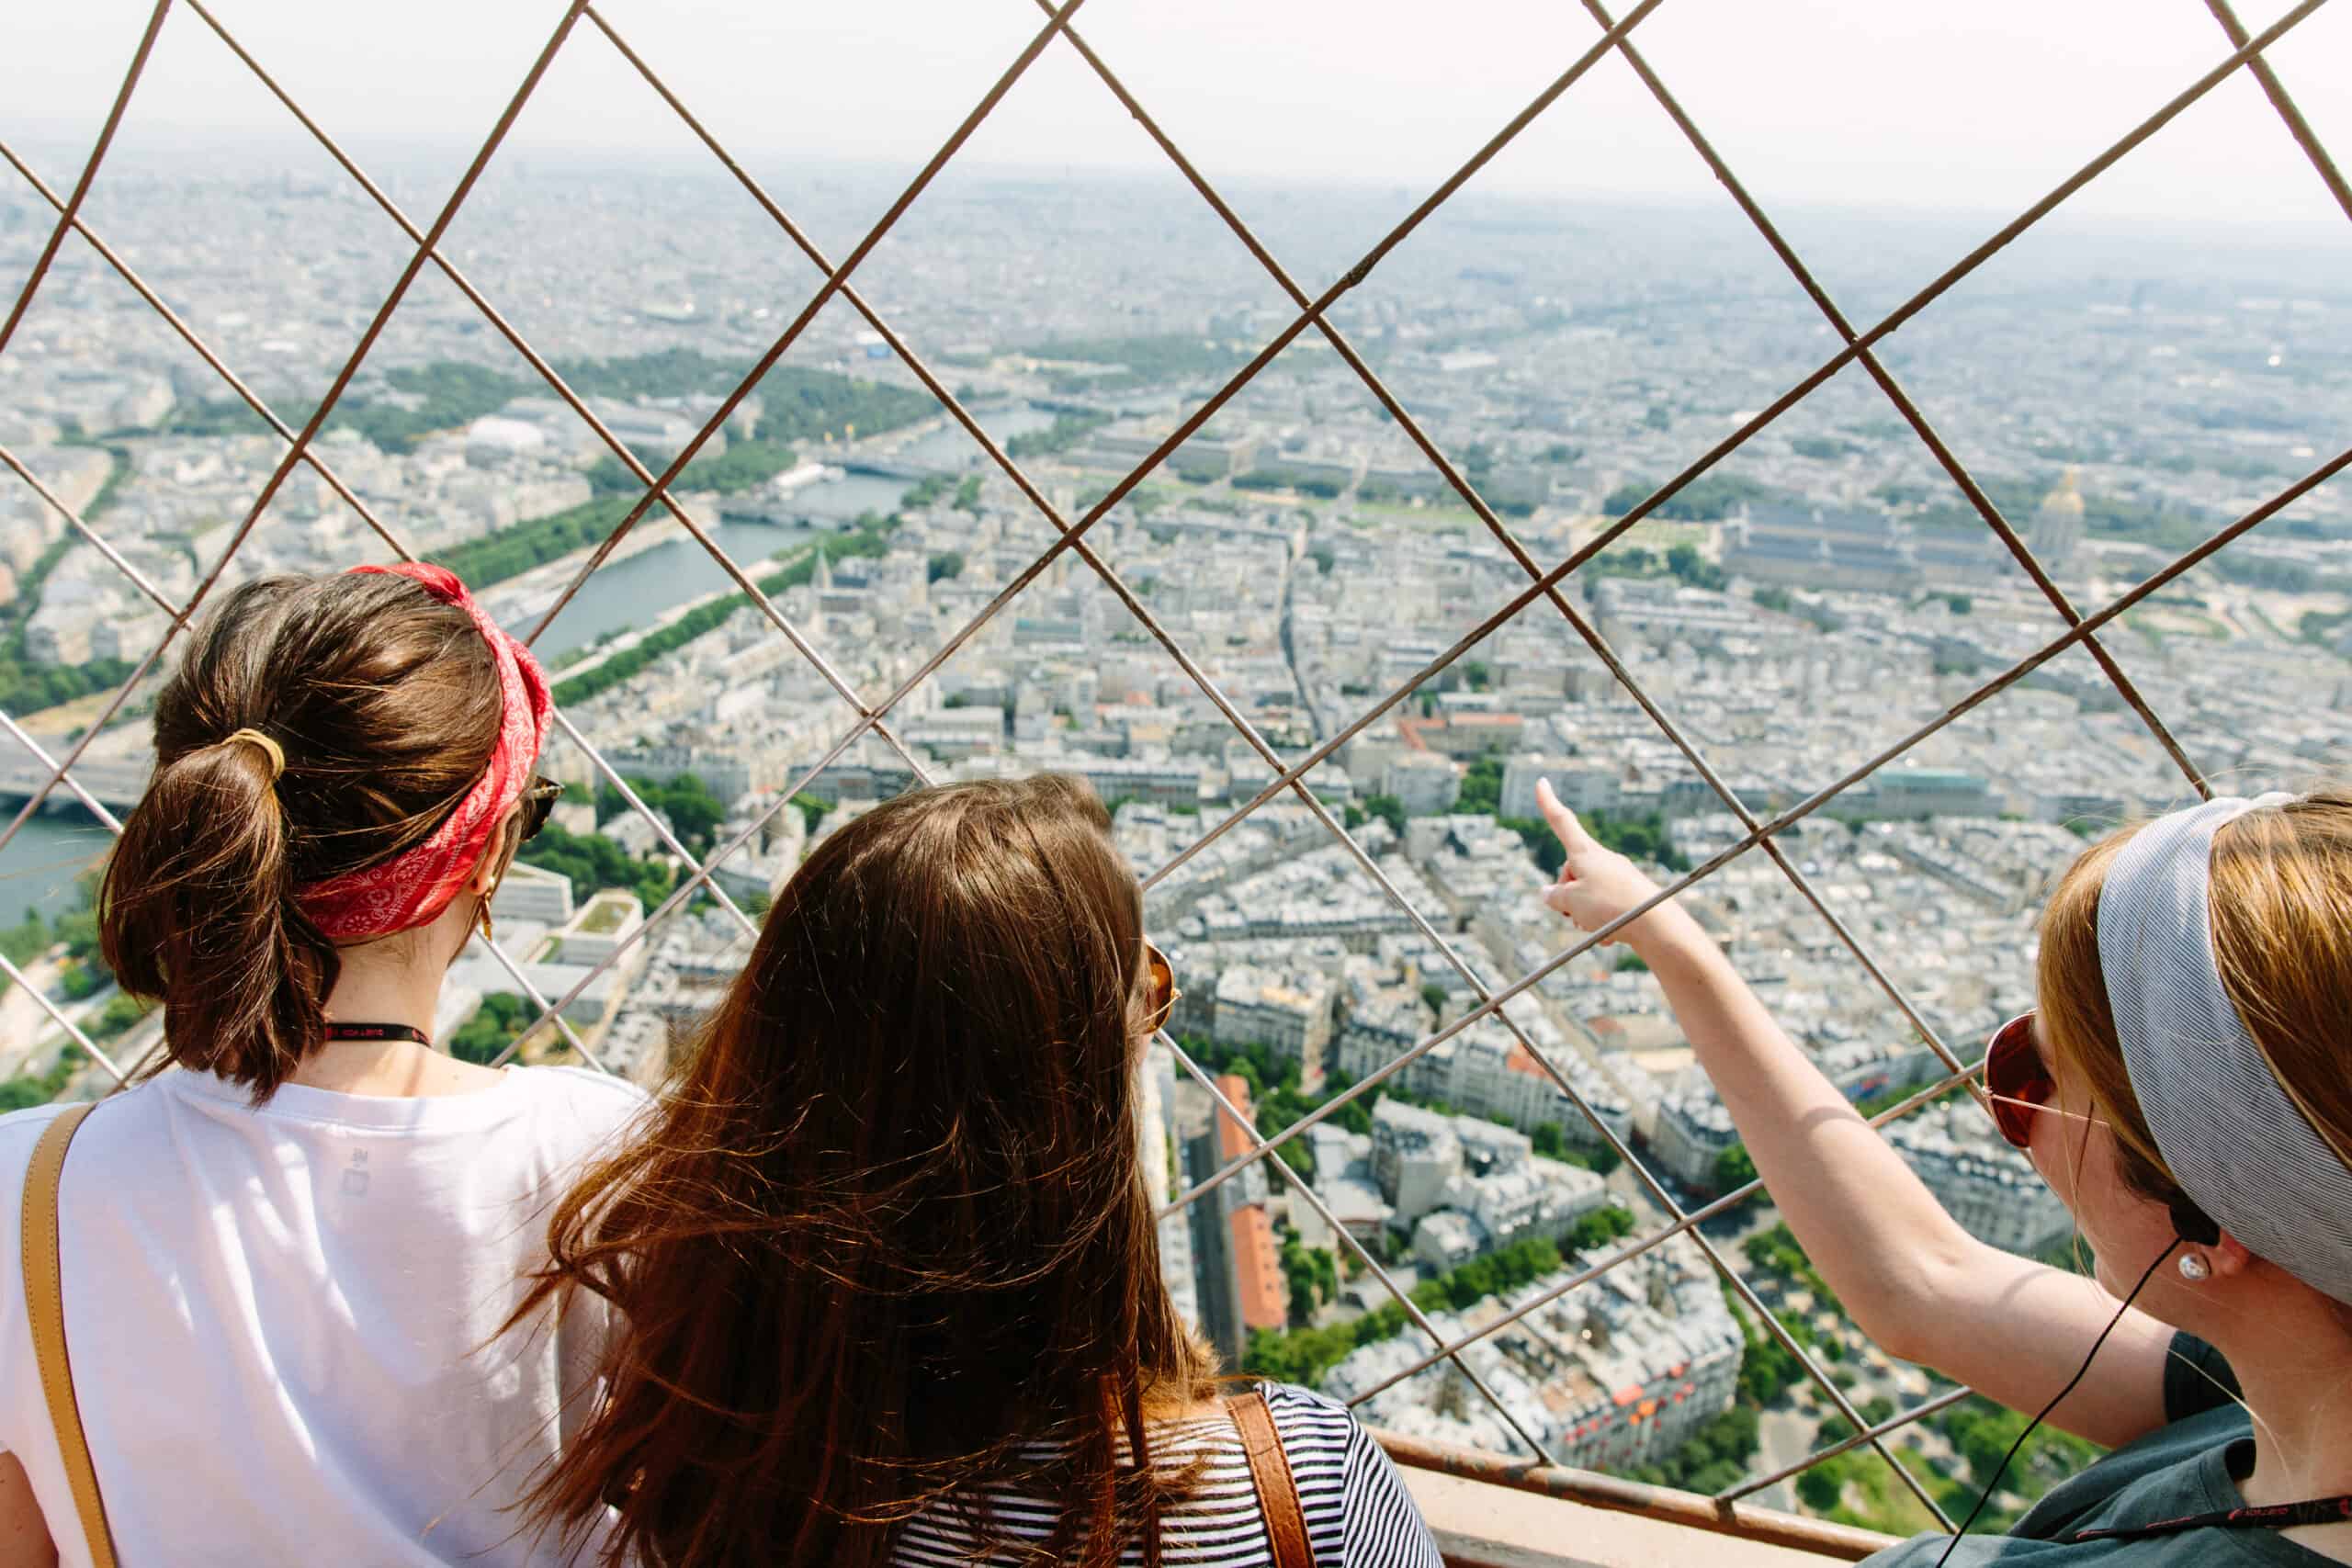 View from the top of the Eiffel Tower.